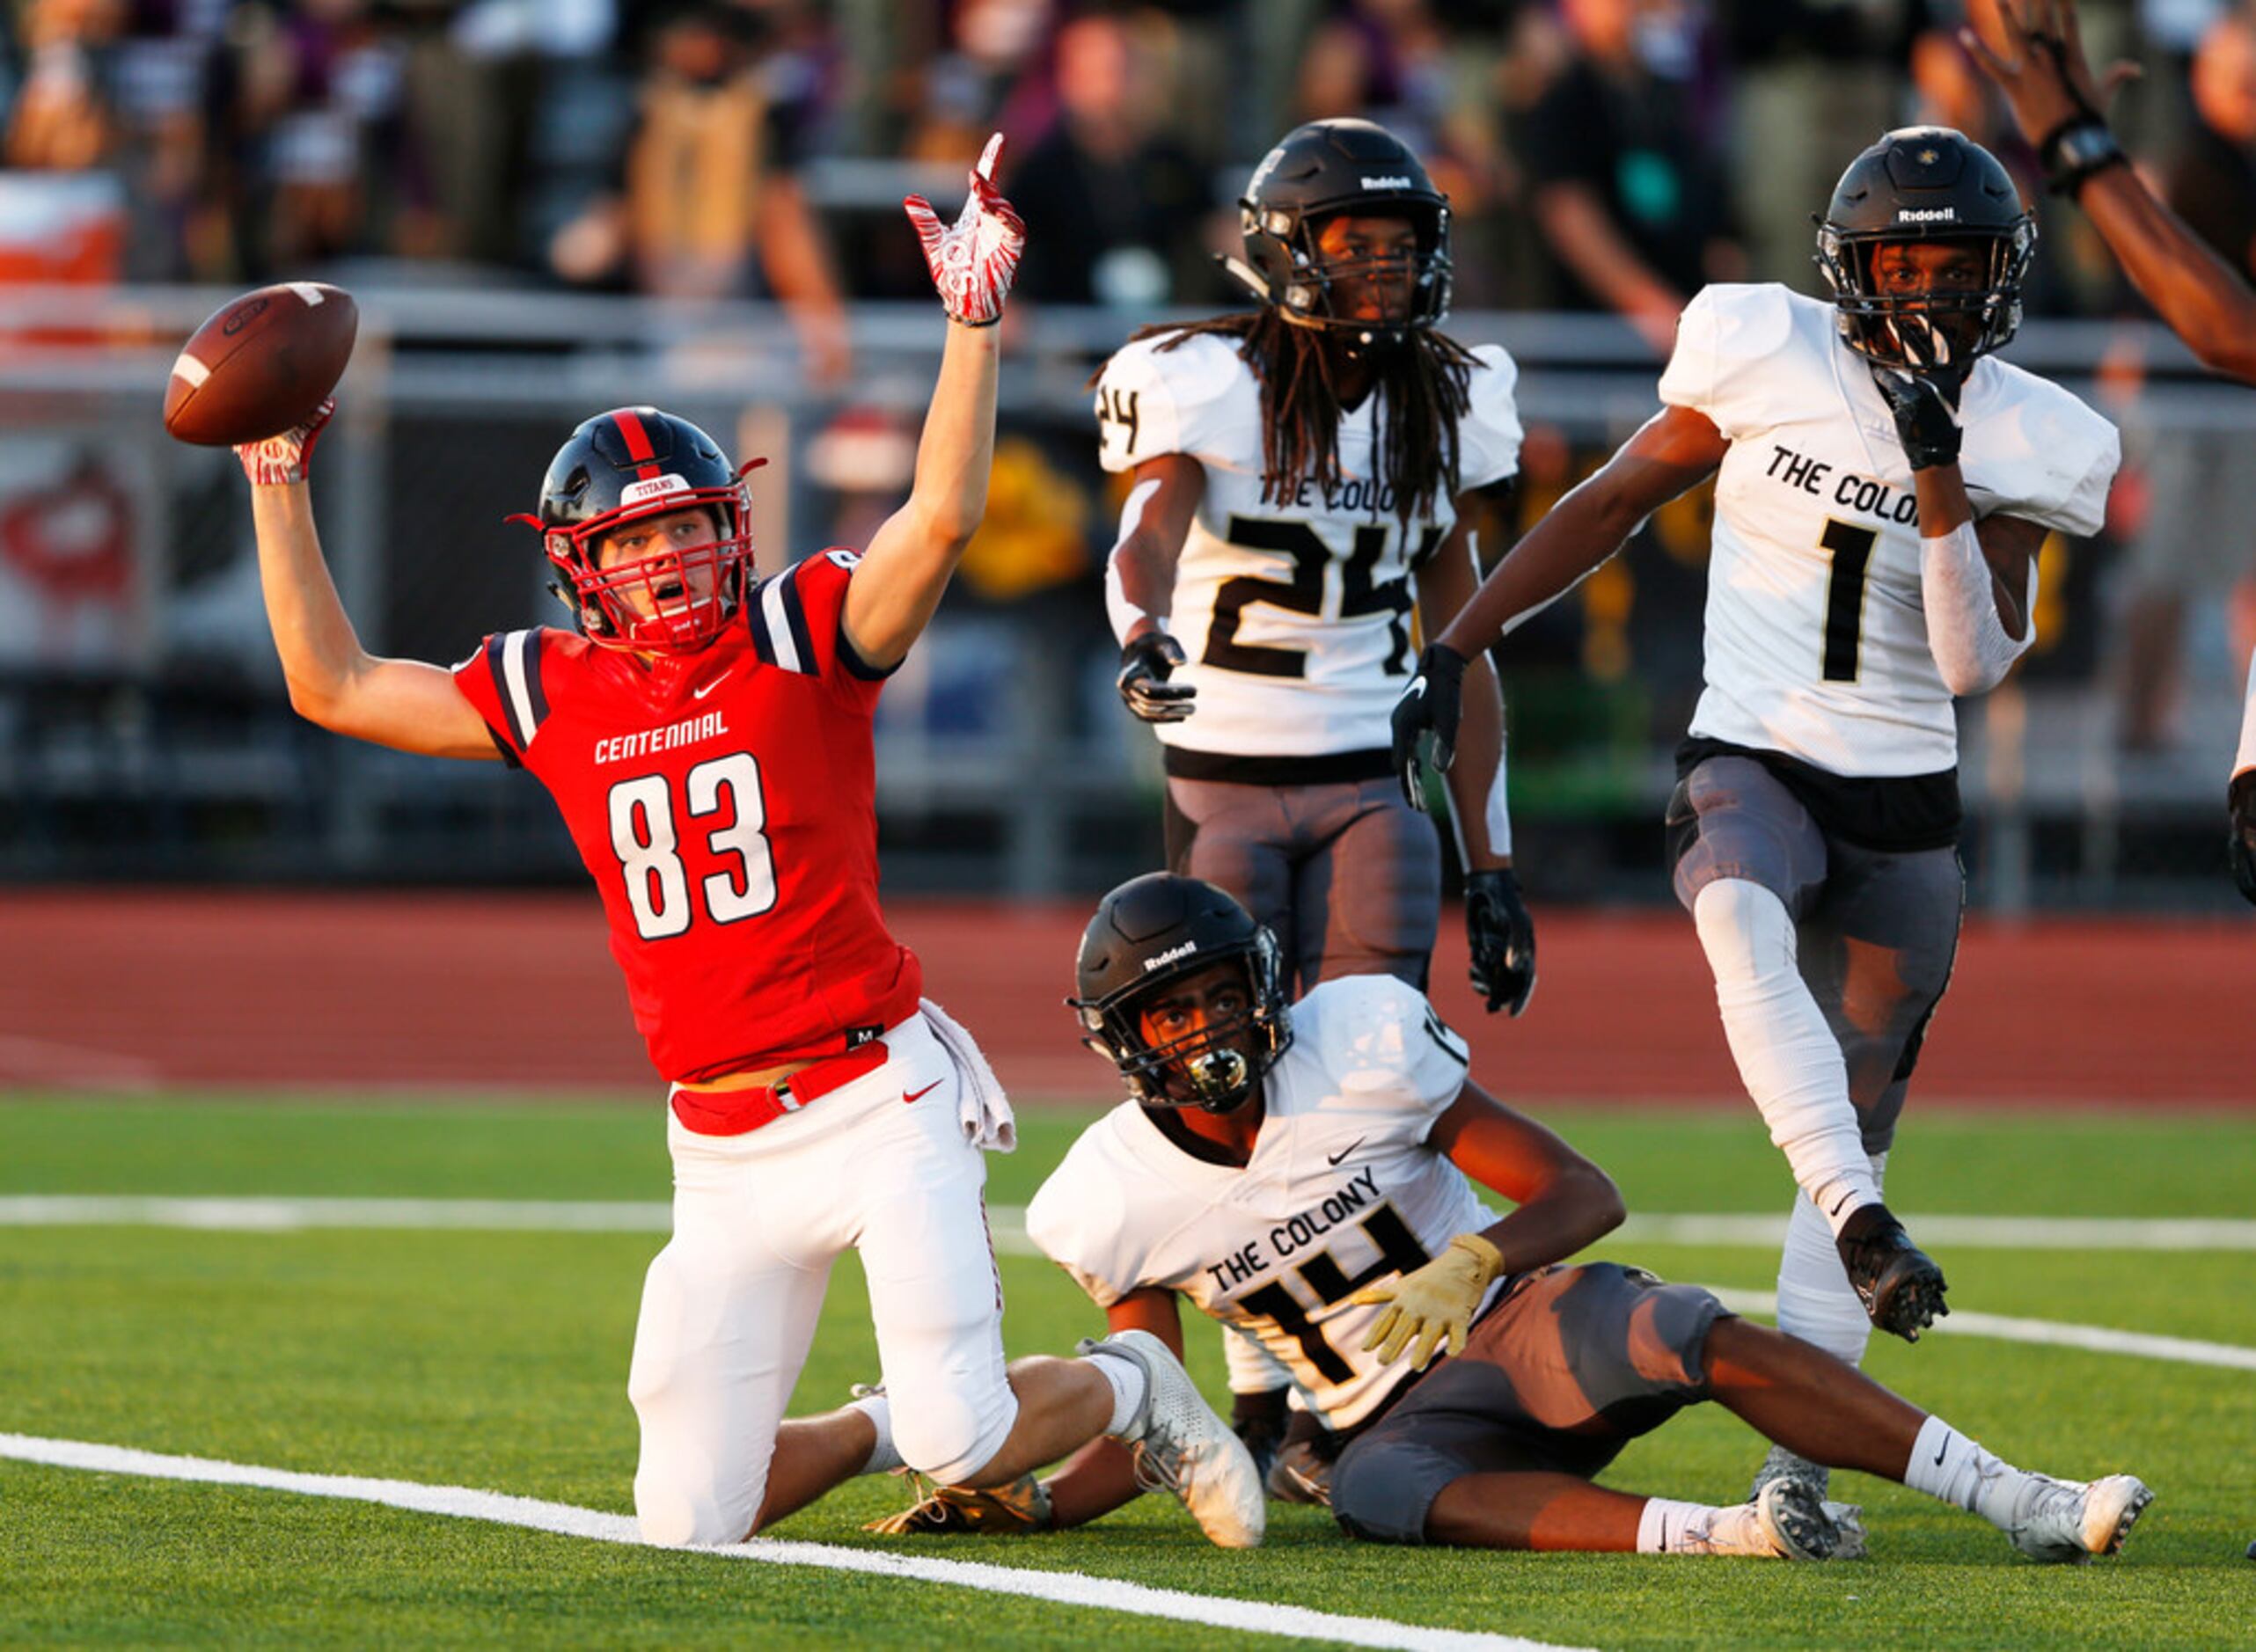 Centennial's Jacob McCoy (83) signals a touchdown after scoring a touchdown as The Colony's...